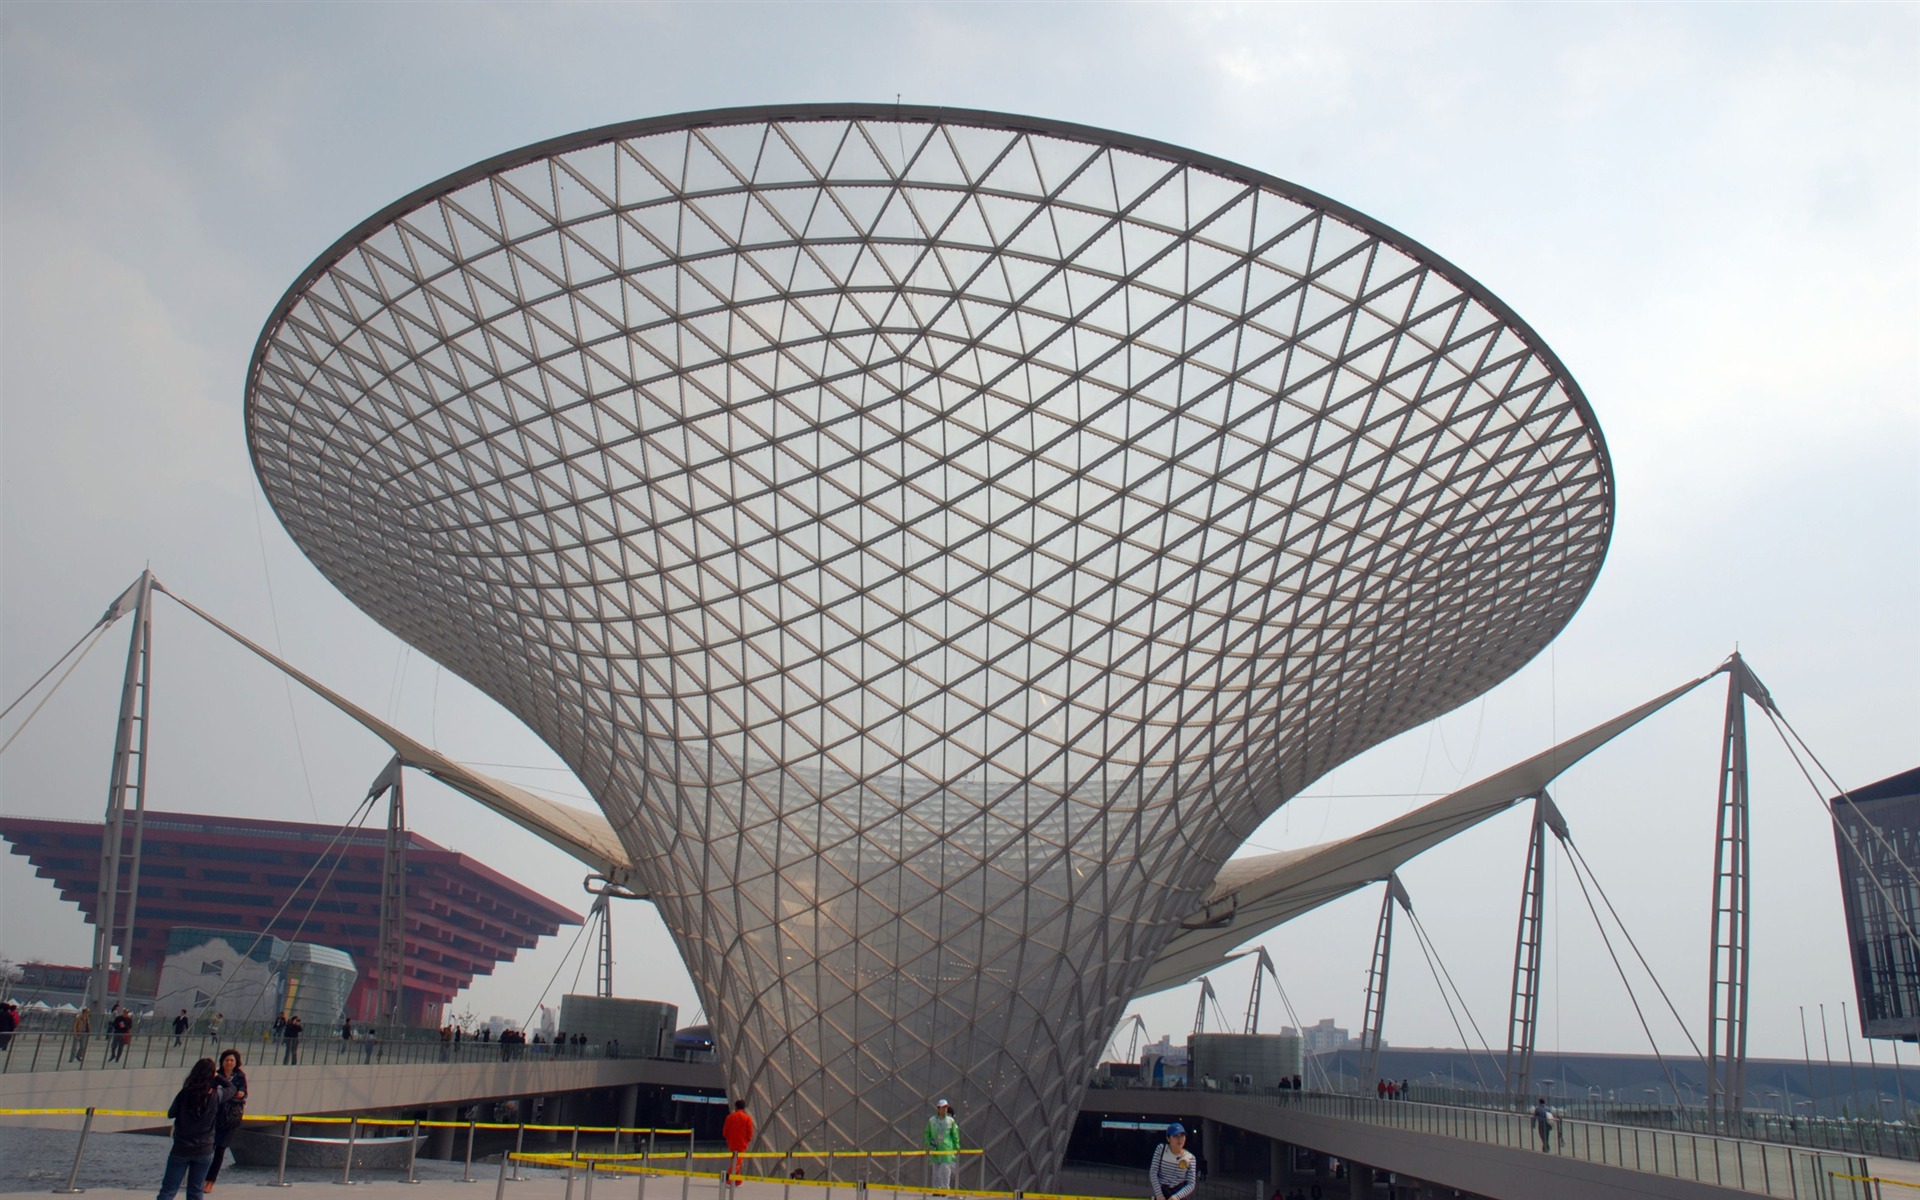 Commissioning of the 2010 Shanghai World Expo (studious works) #19 - 1920x1200